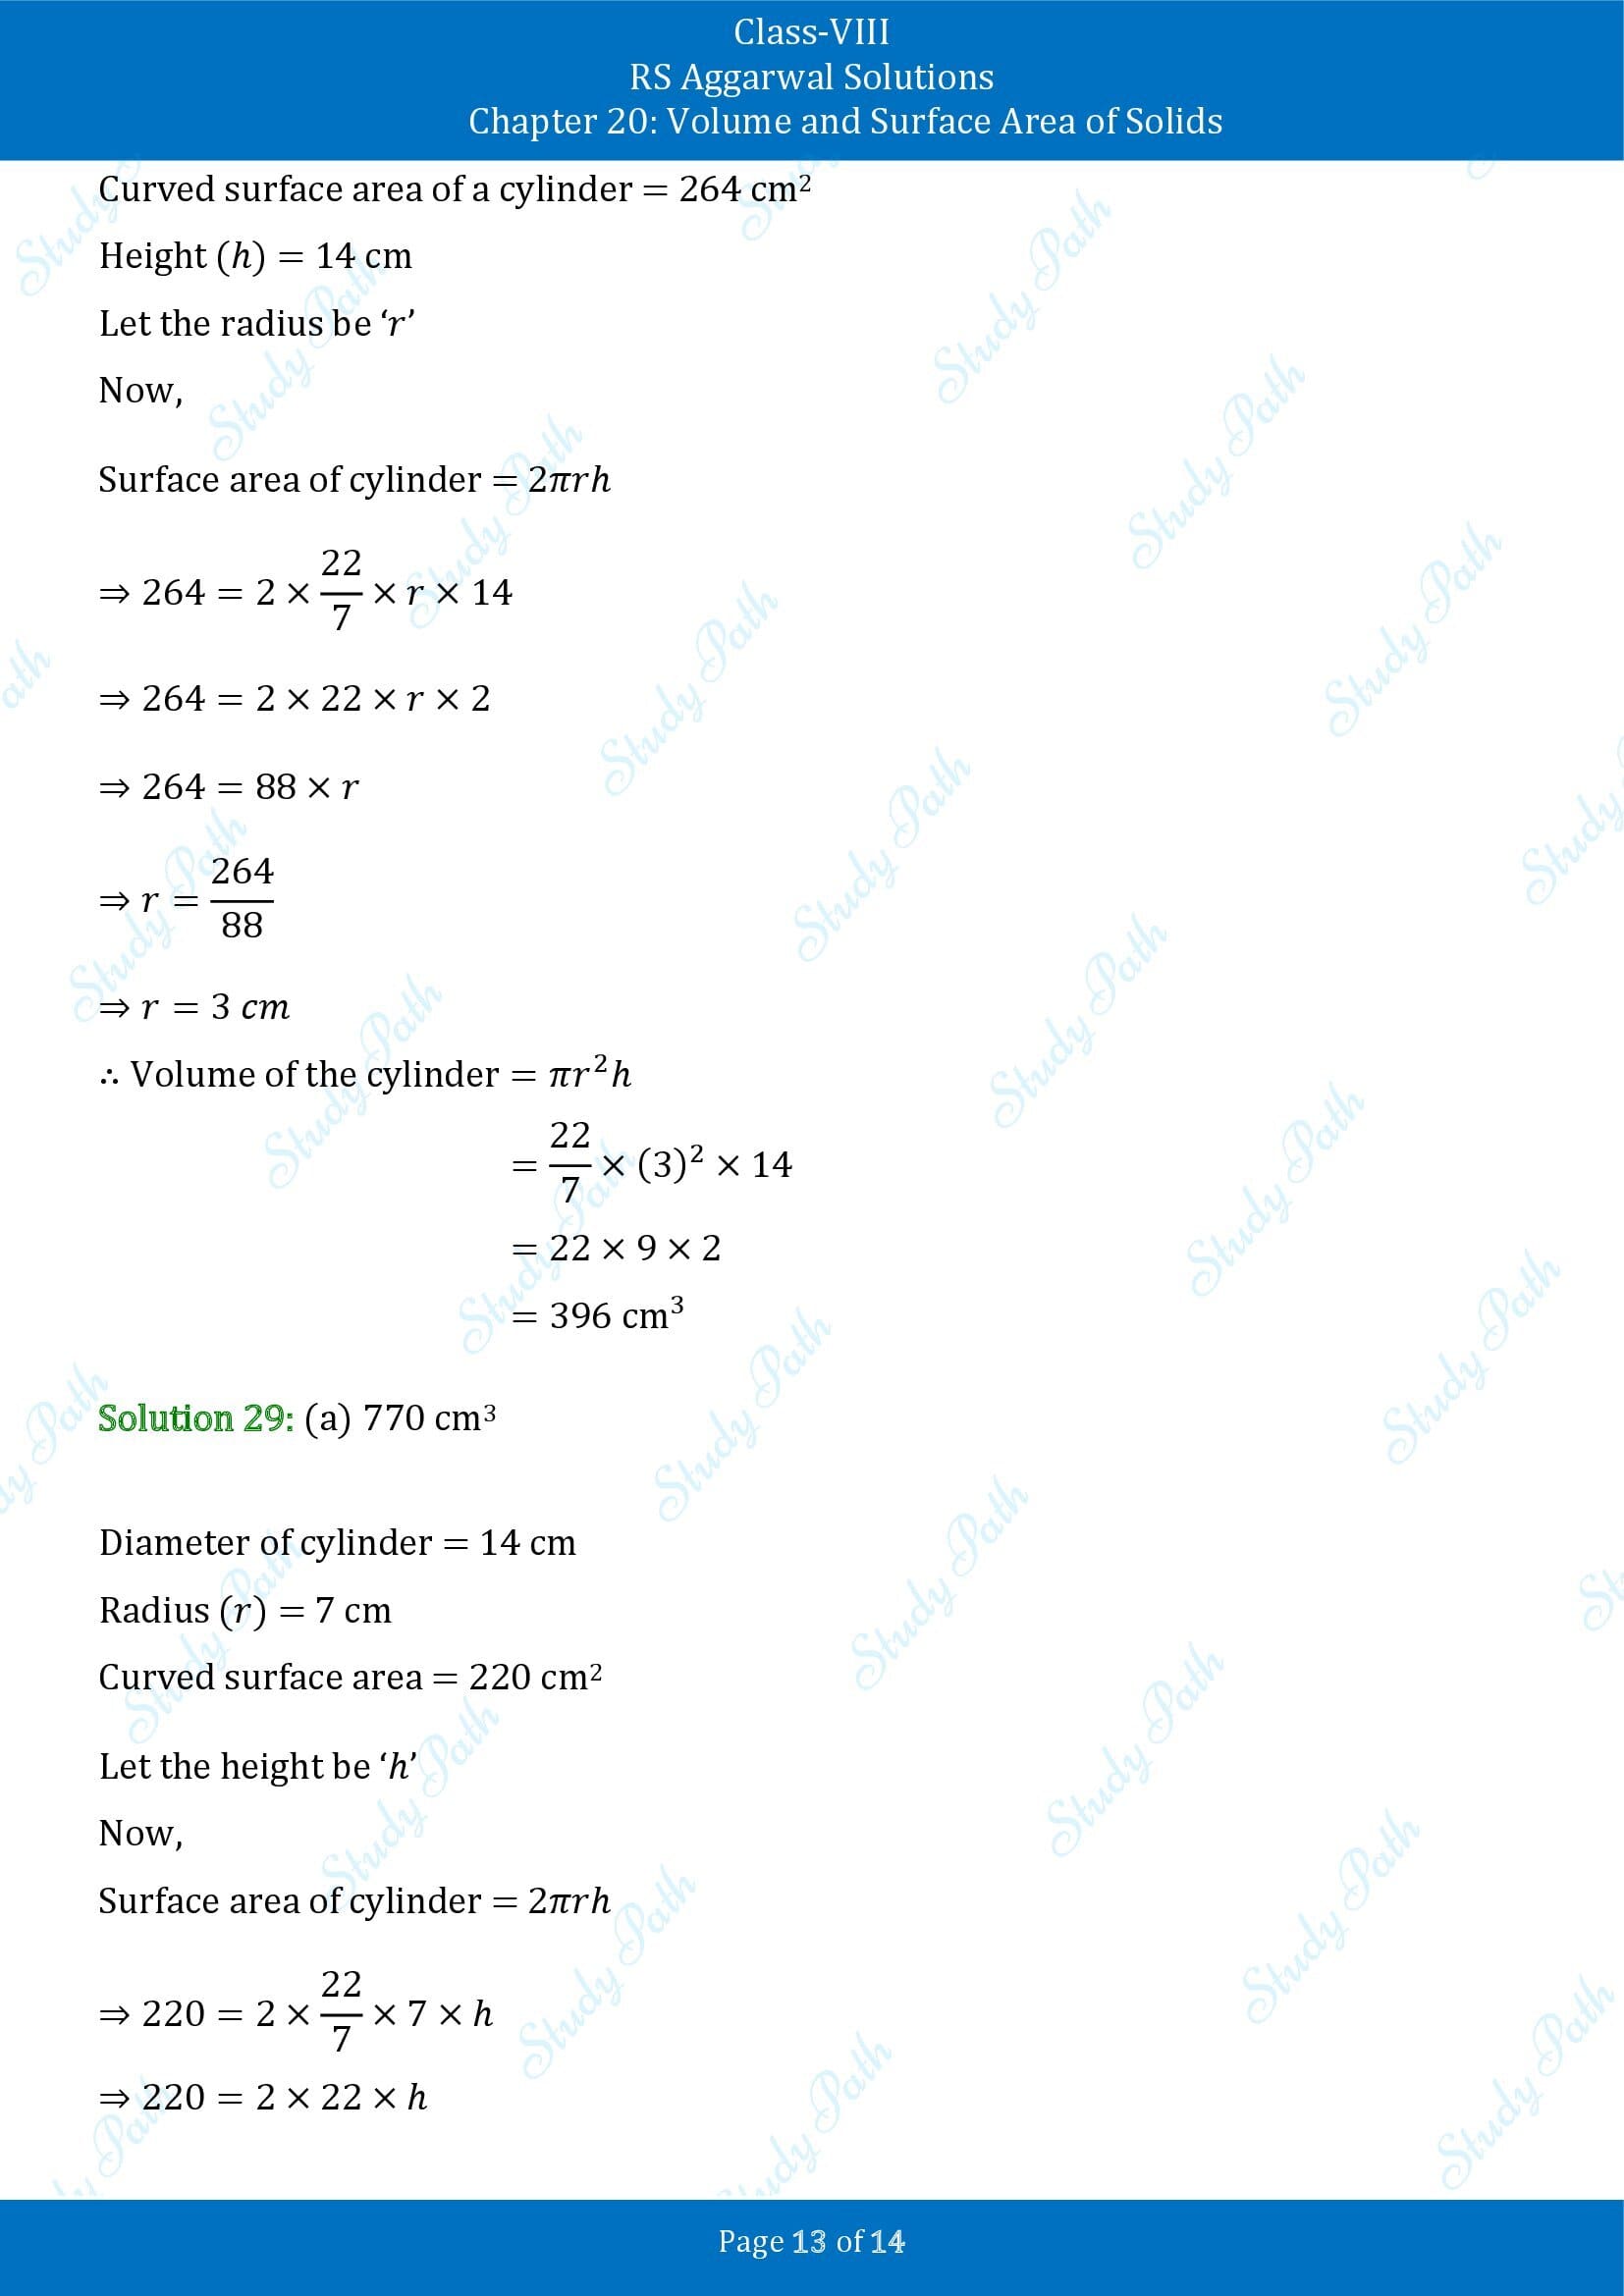 RS Aggarwal Solutions Class 8 Chapter 20 Volume and Surface Area of Solids Exercise 20C MCQs 00013